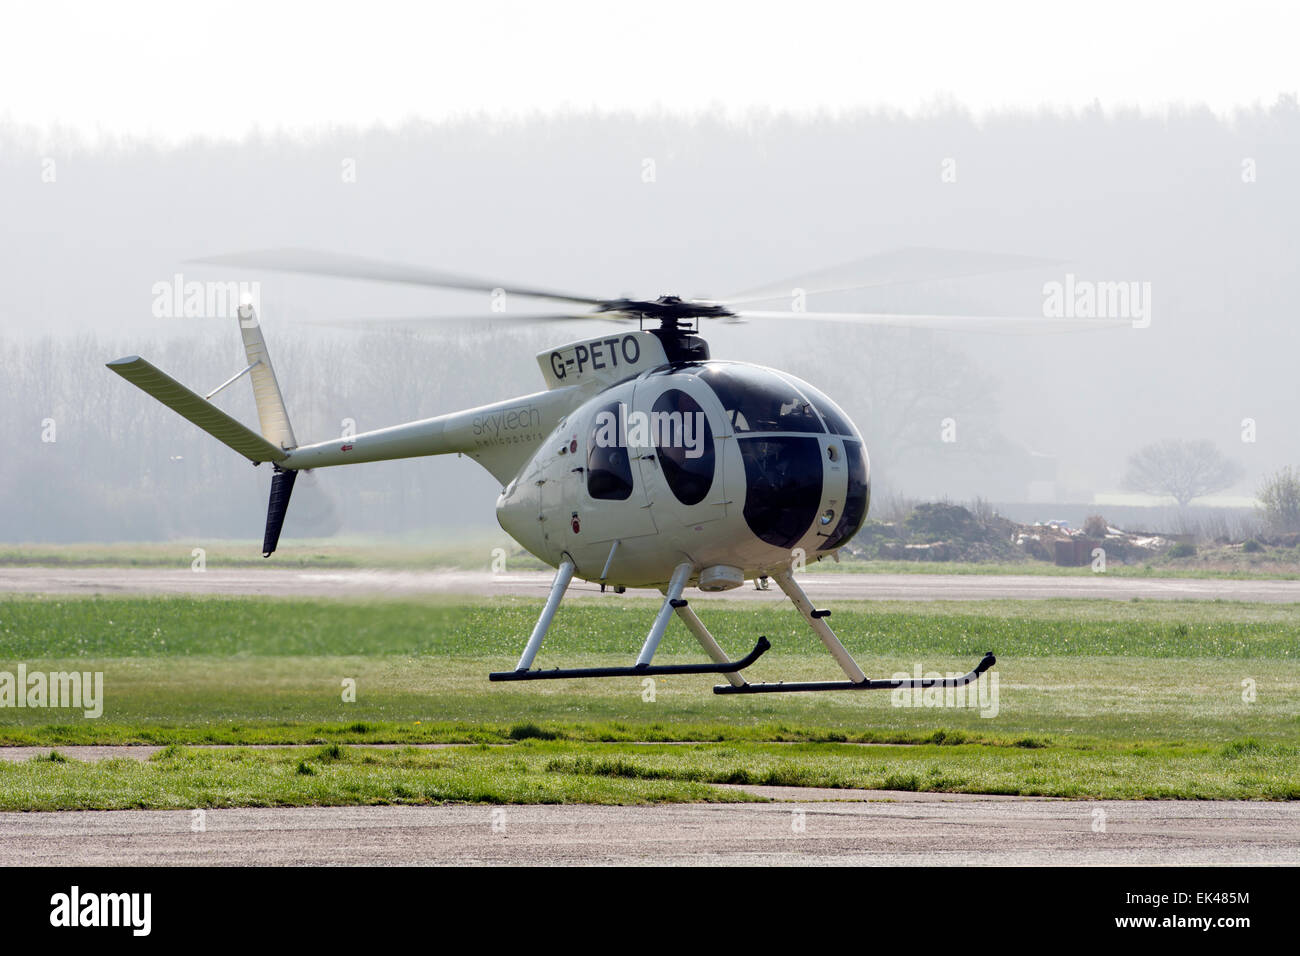 MD Helicopters MD-500 (G-PETO) Stock Photo